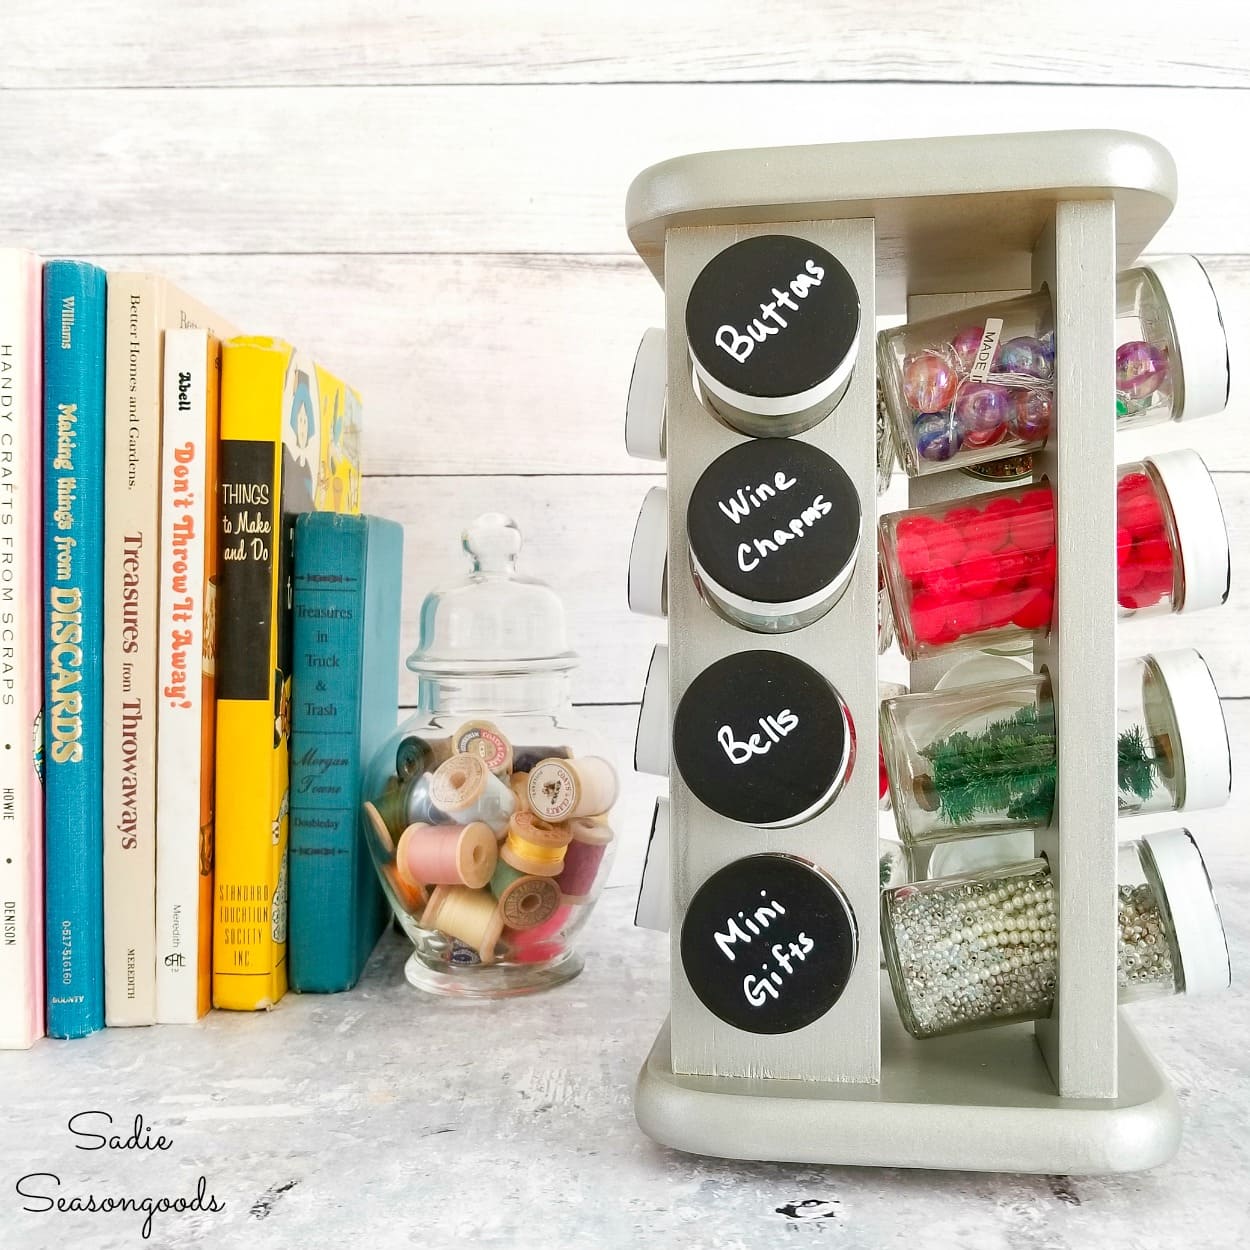 Organizing Craft Supplies in a Spinning Spice Rack